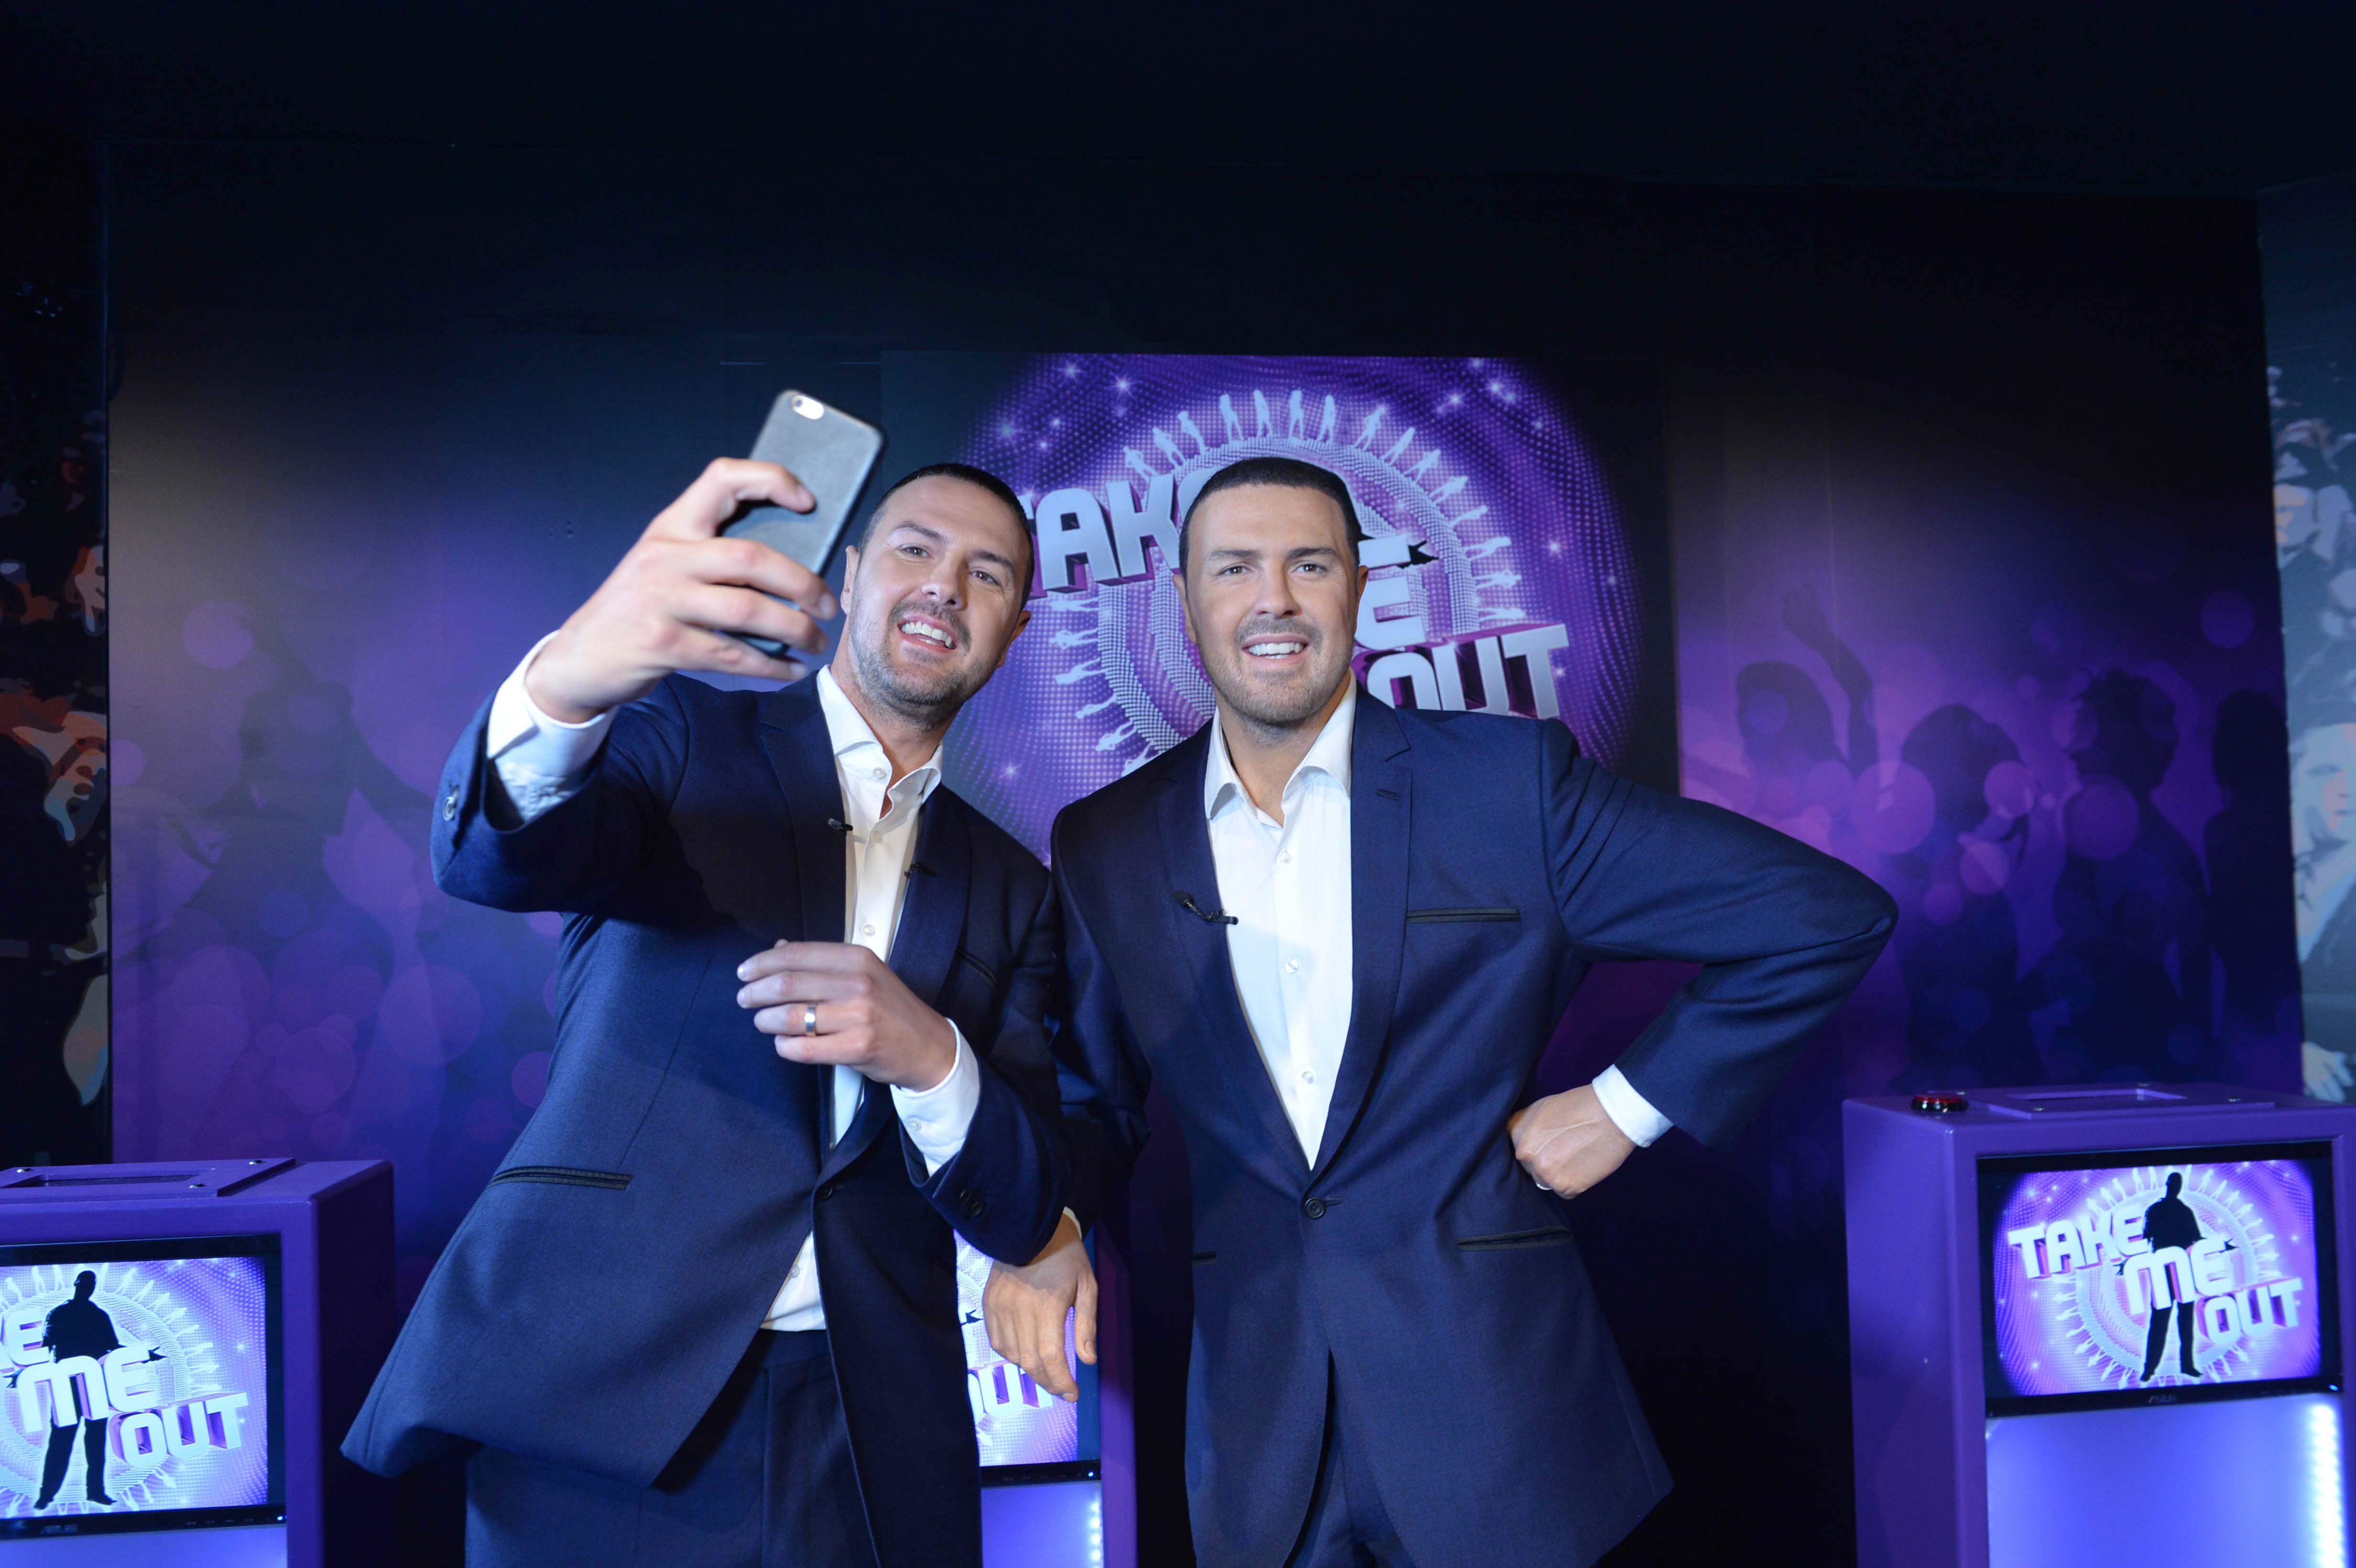 Paddy McGuinness taking a selfie with his wax figure at Madame Tussauds Blackpool